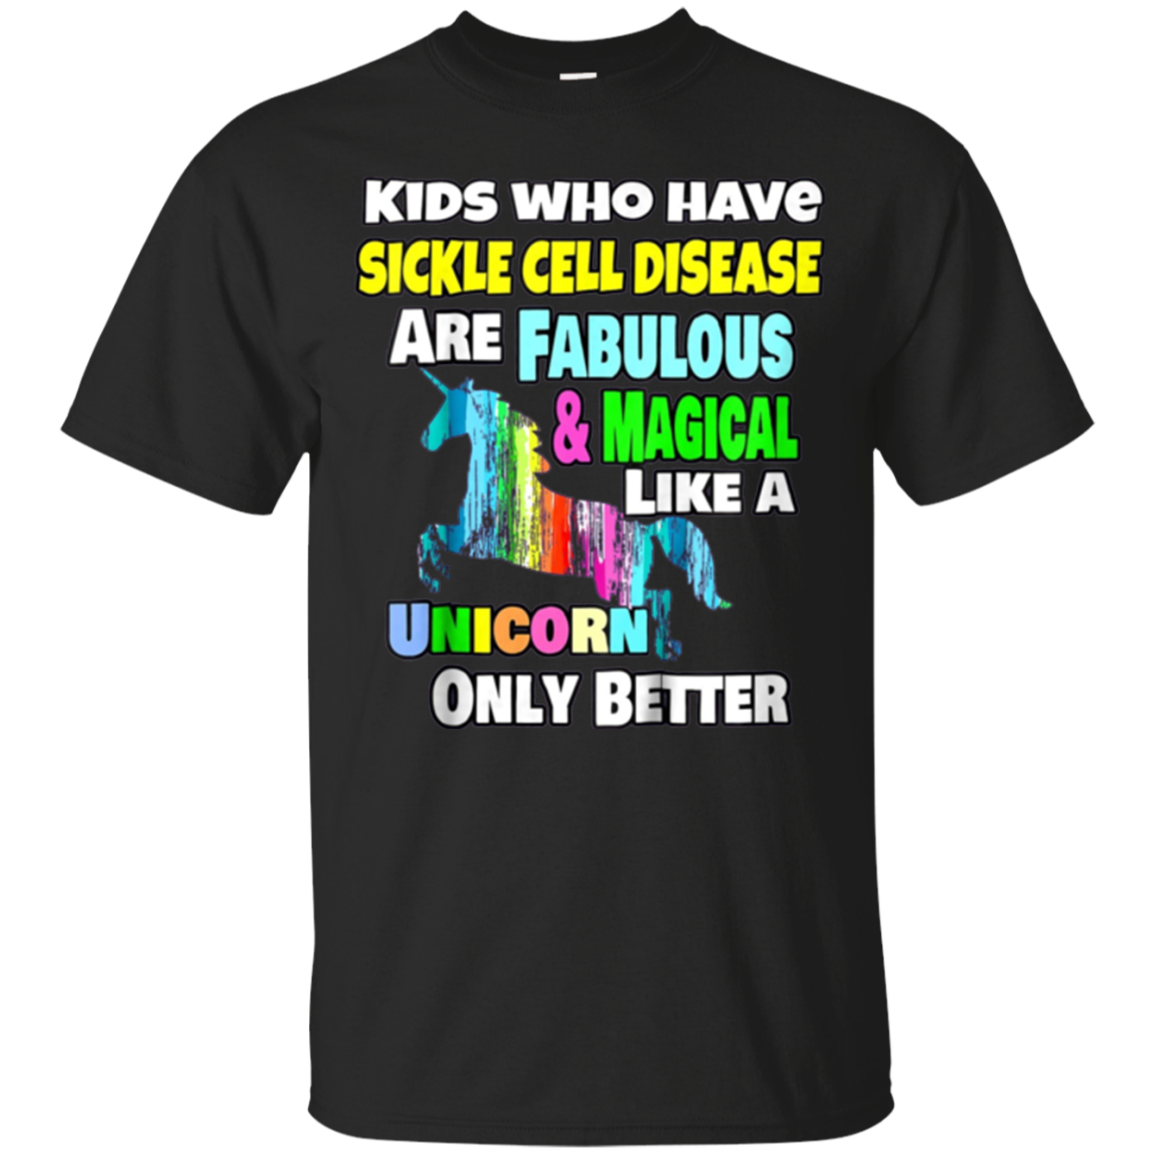  With Sickle Cell Disease Are Fabulous Magical Unicorns Shirts